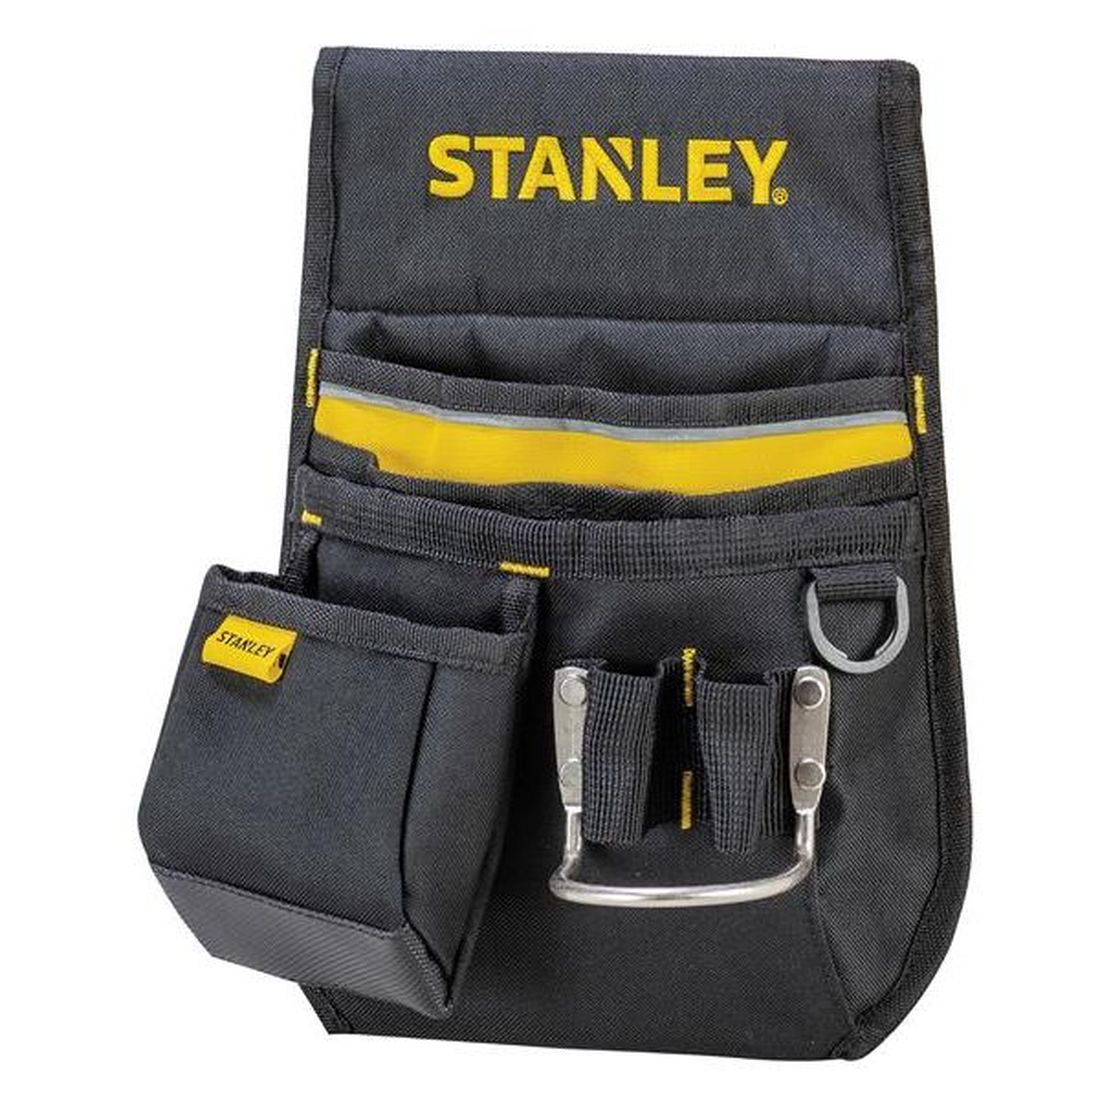 STANLEY Tool Pouch                        